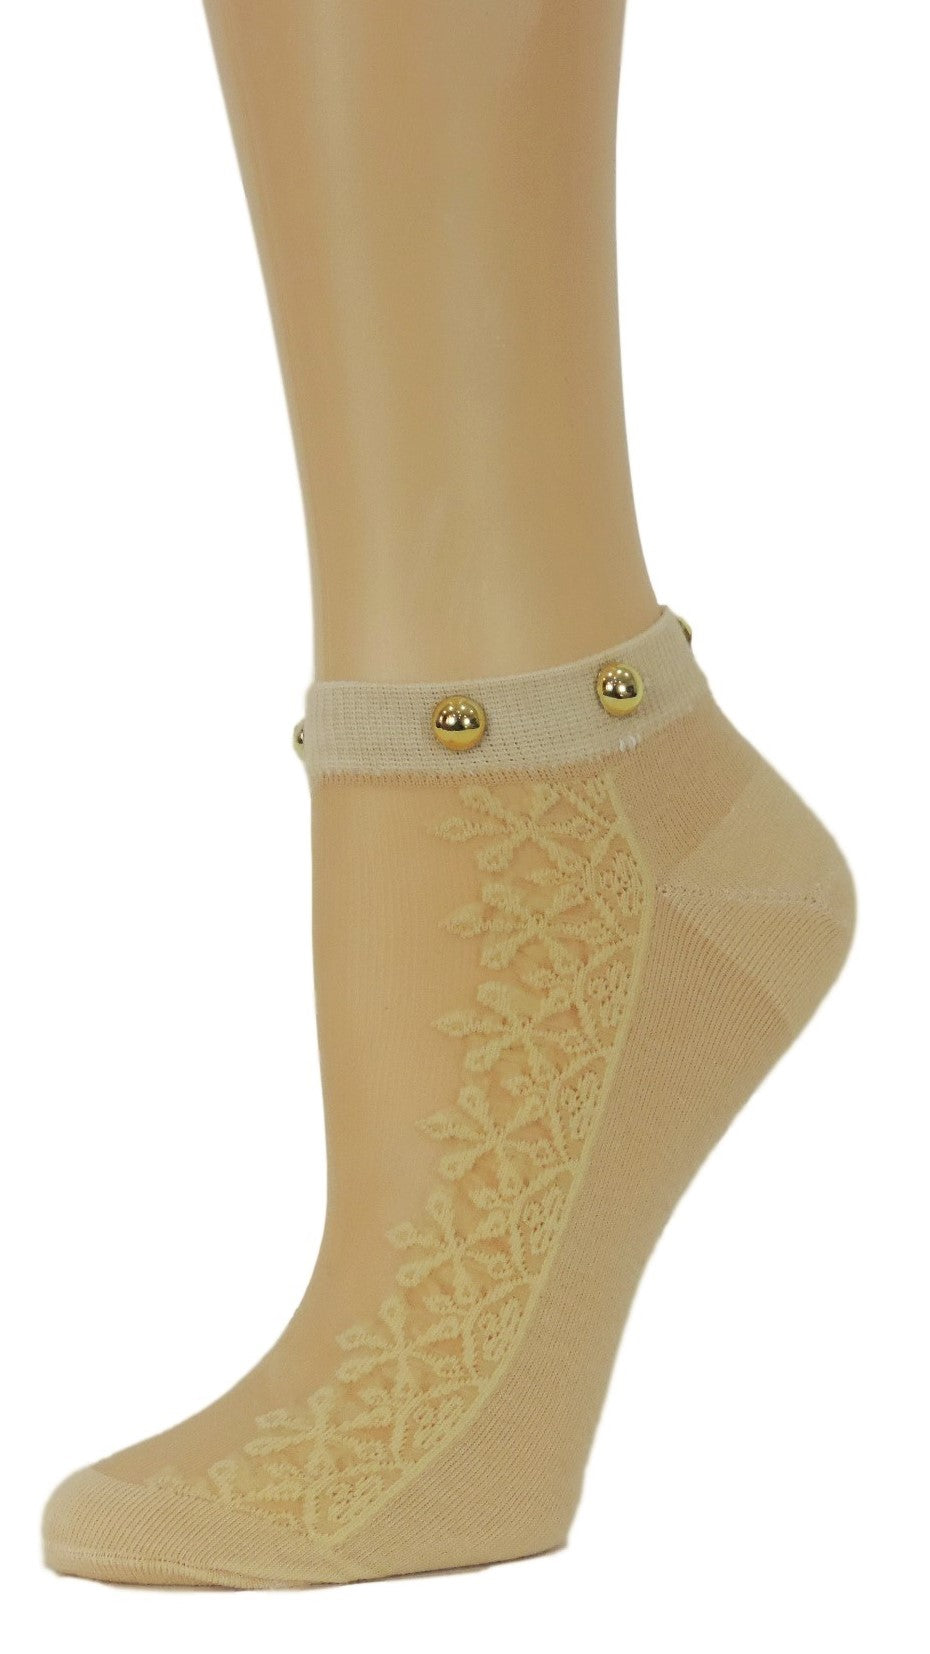 Sequence Floral Ankle Custom Sheer Socks with beads - Global Trendz Fashion®